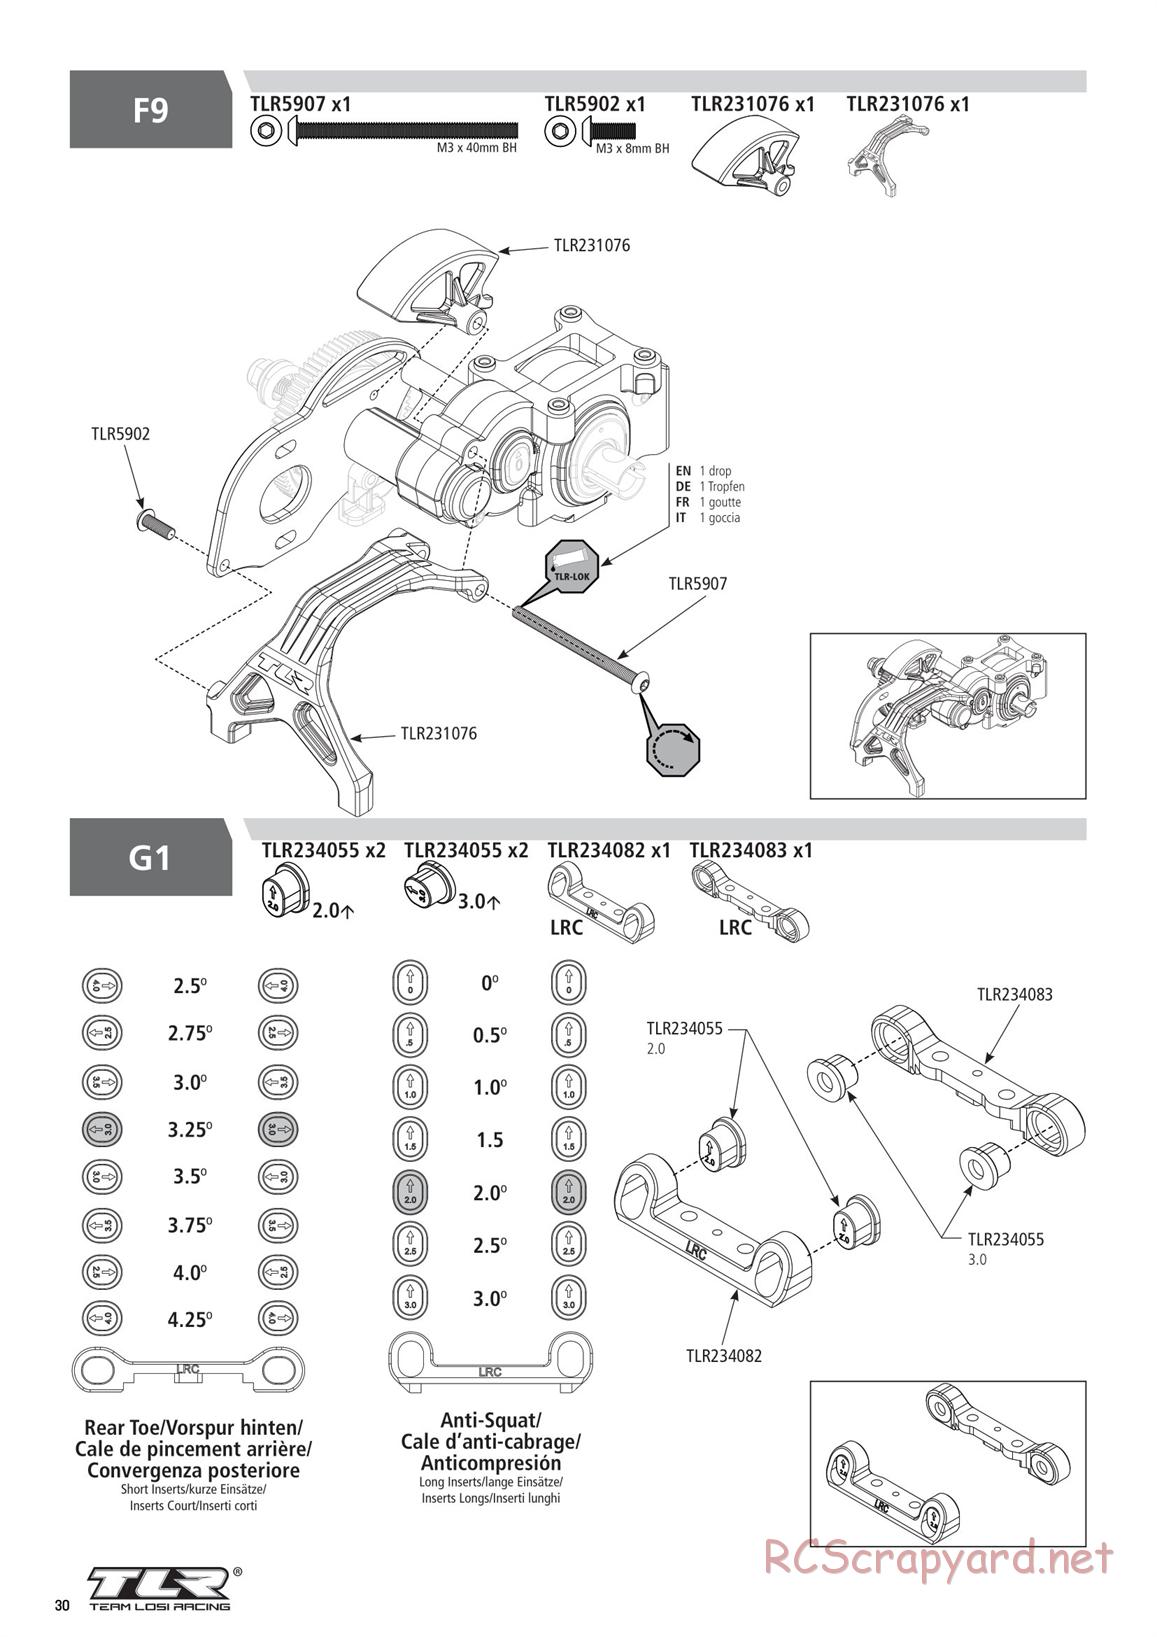 Team Losi - TLR 22 5.0 DC Race - Manual - Page 30